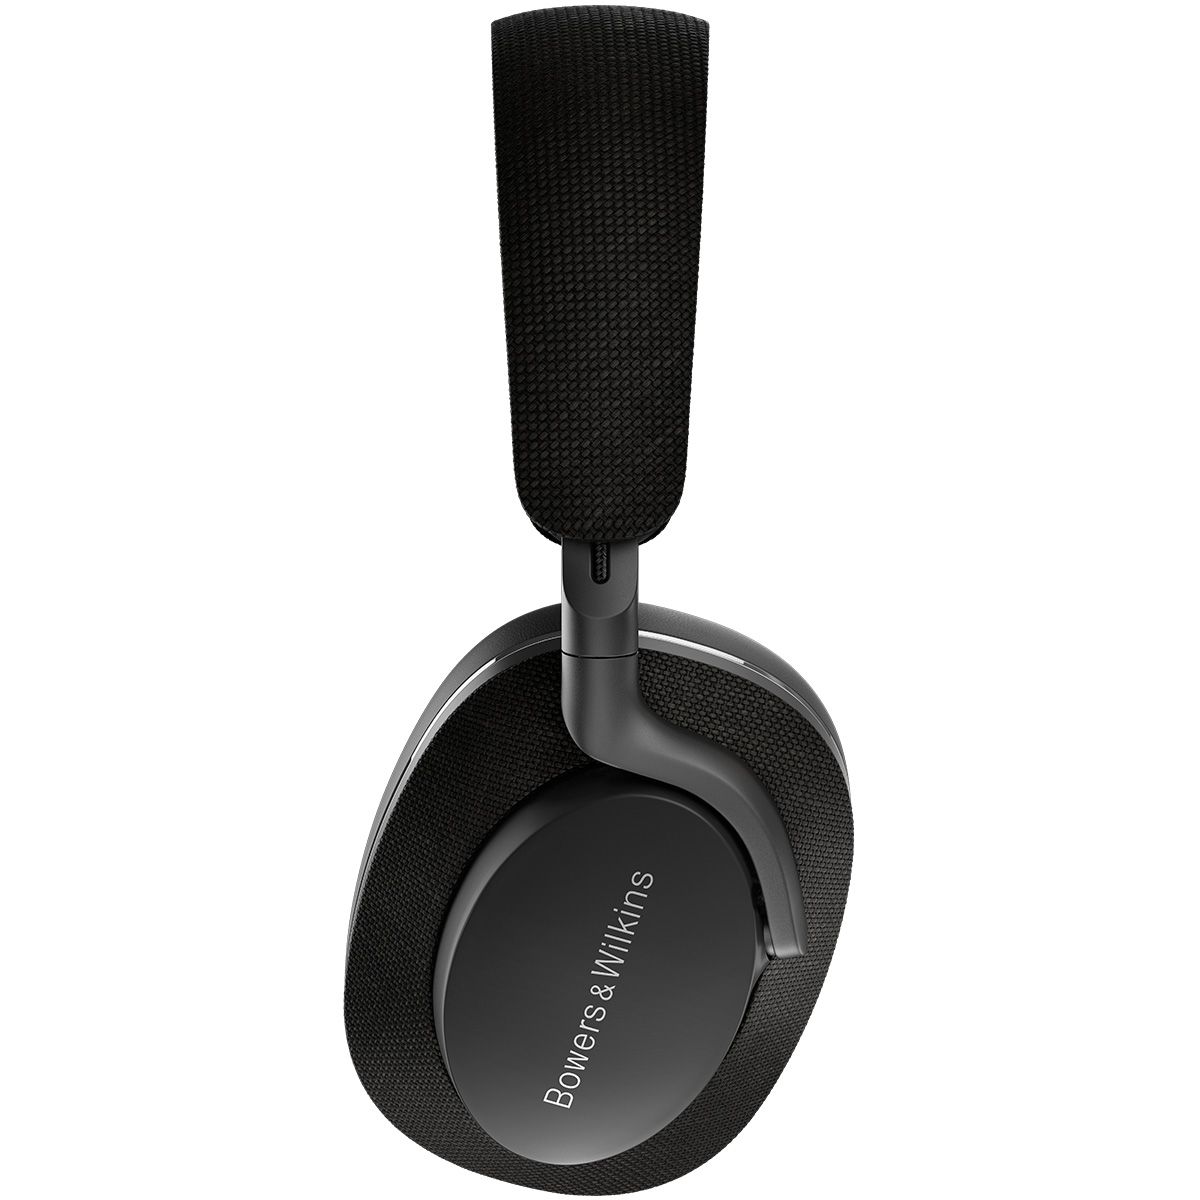 Side view of the Px7 S2 Premium Wireless Over-Ear Headphones in Black.